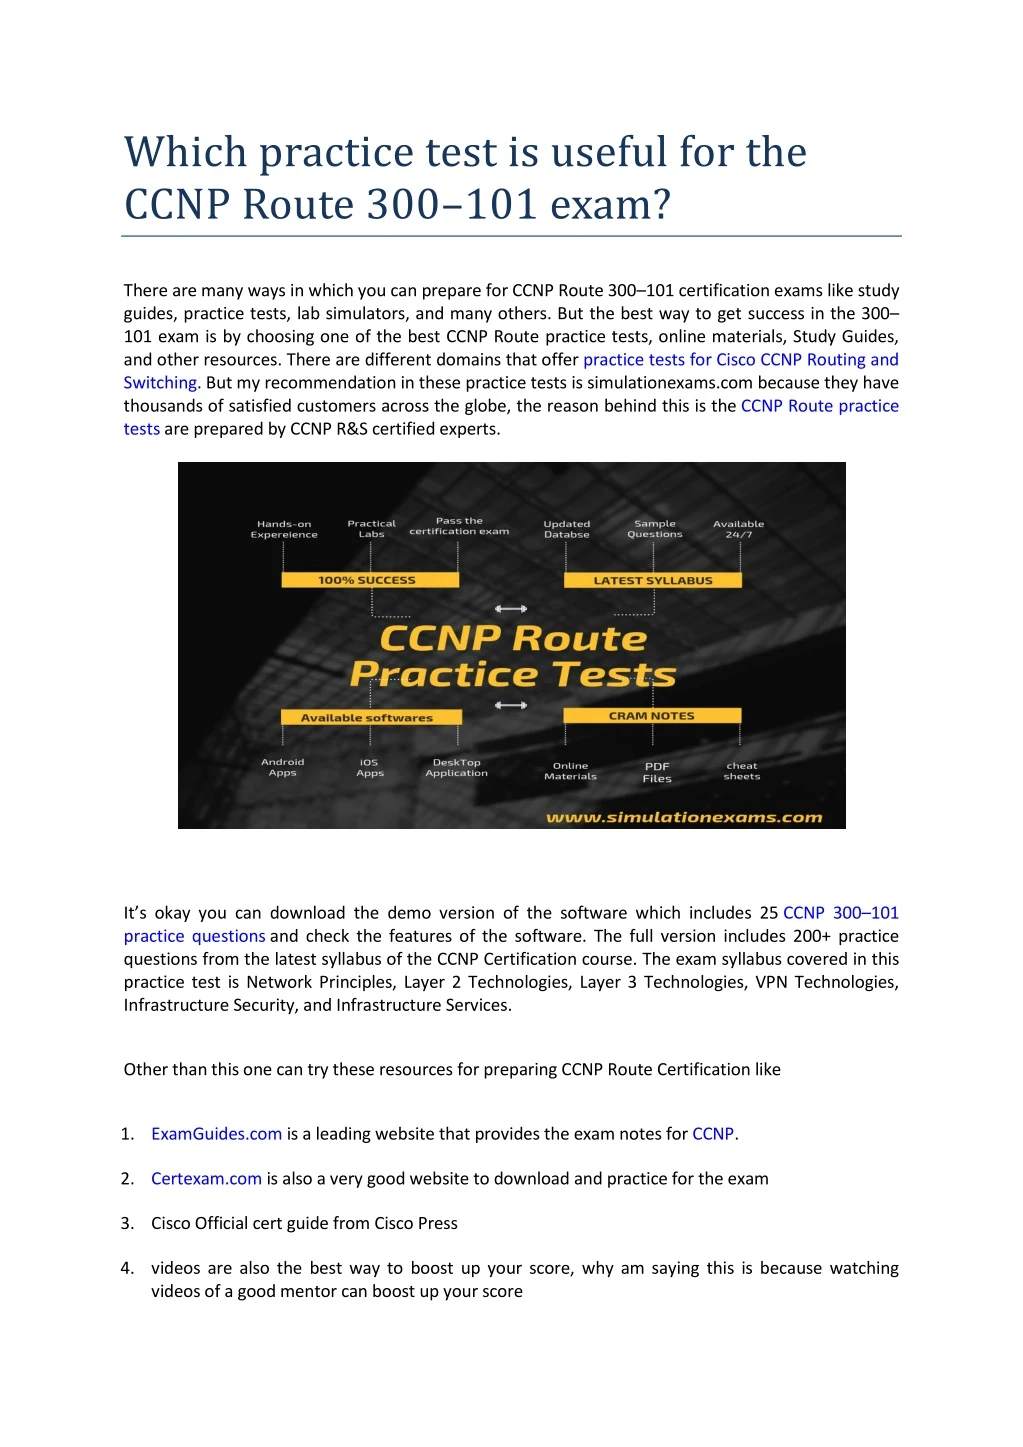 which practice test is useful for the ccnp route